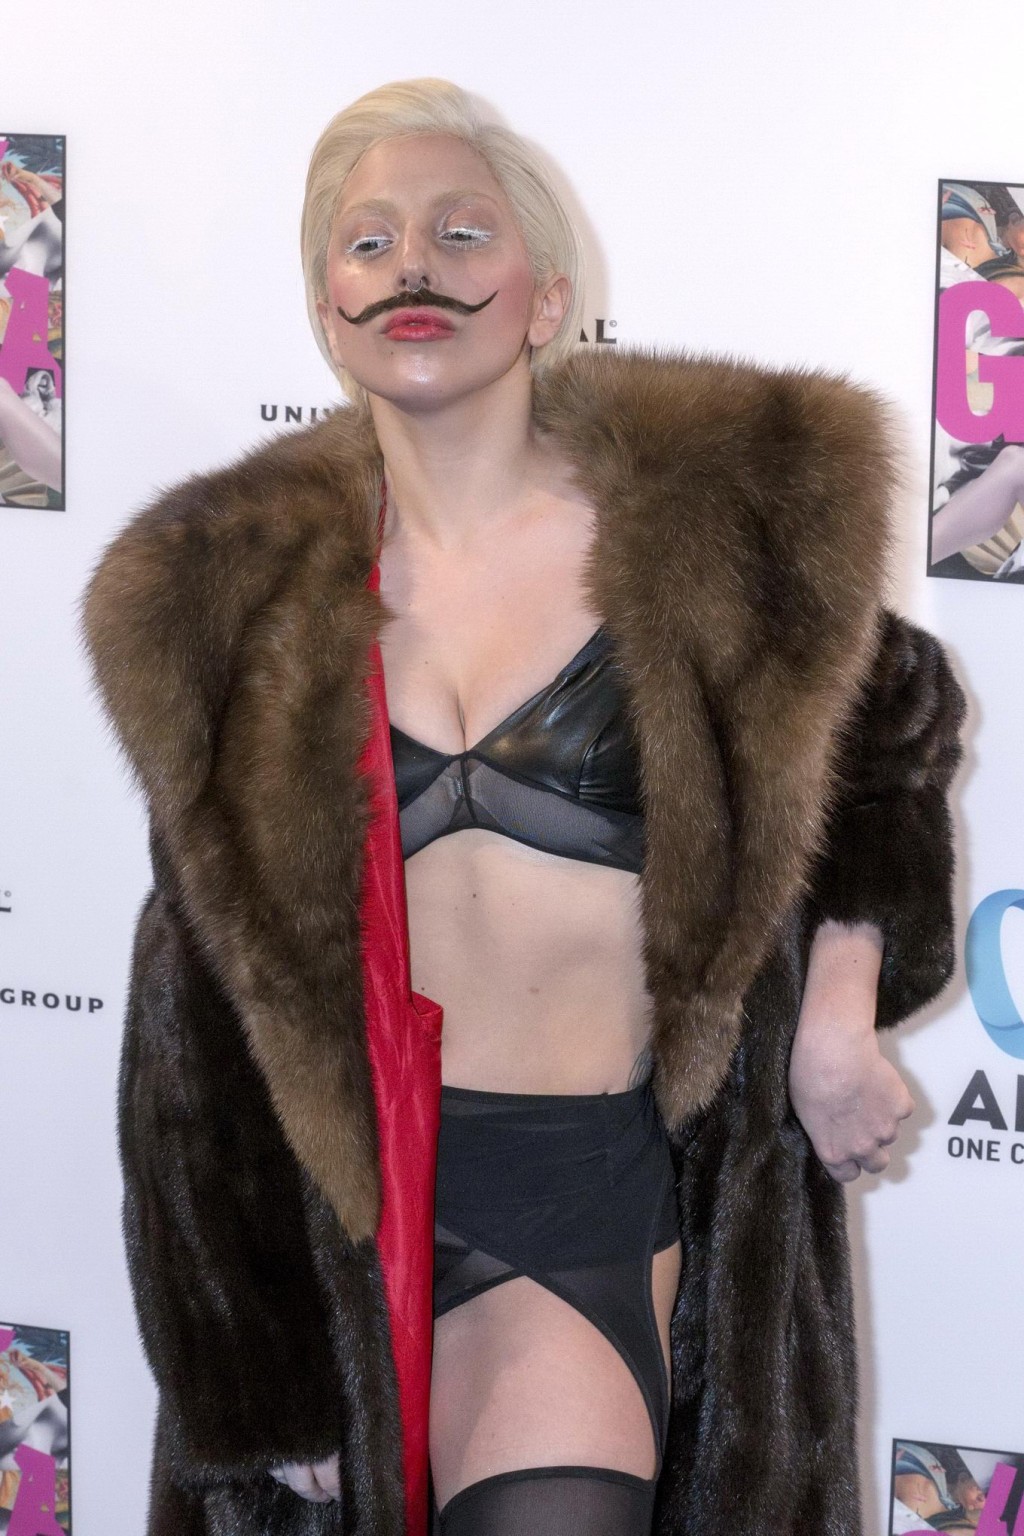 Lady Gaga wearing lingerie and fake moustache at her album promotion in Berlin #75215069